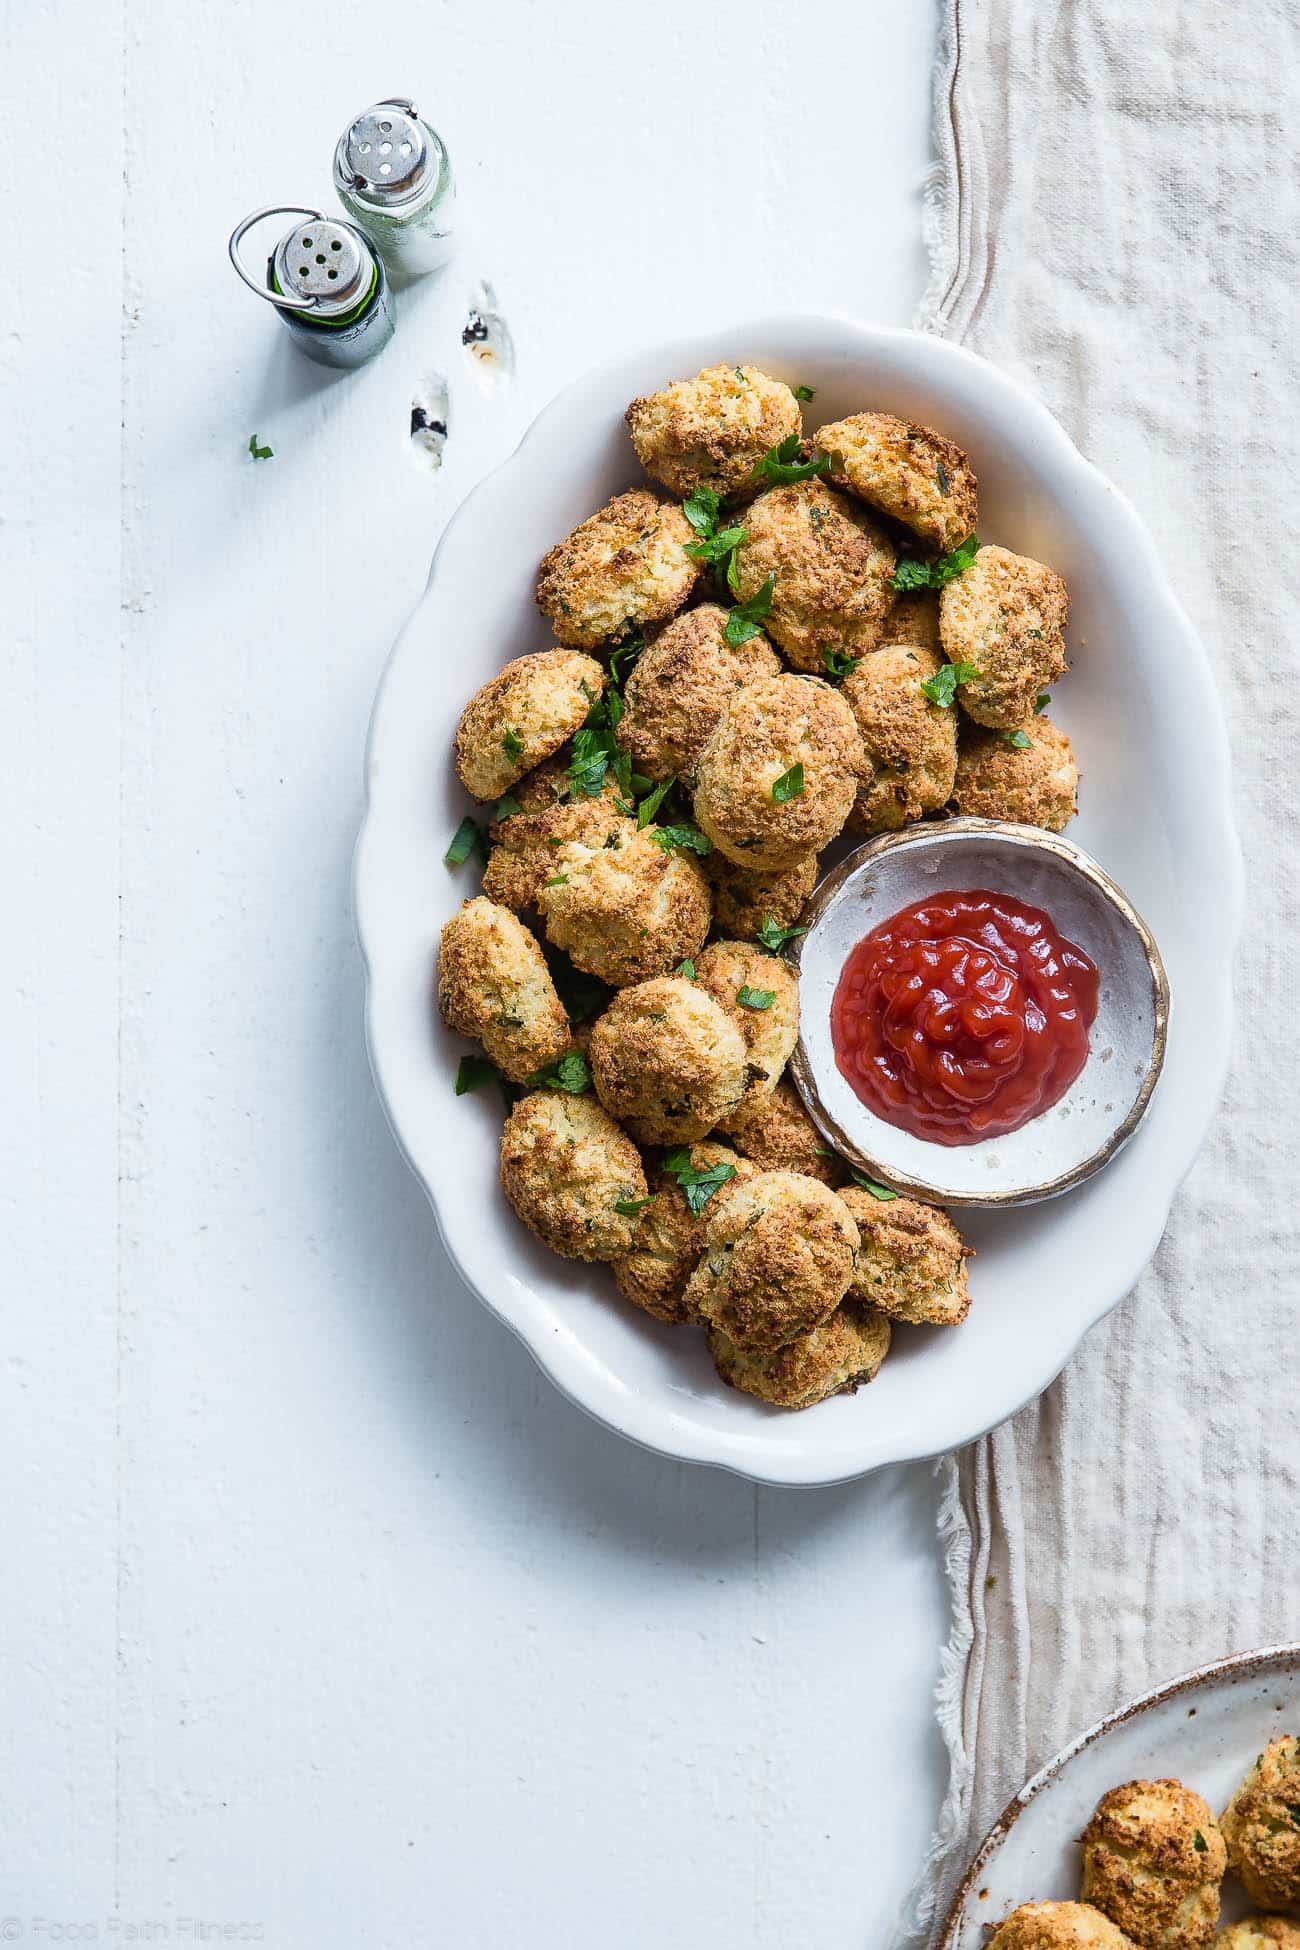 Paleo Cauliflower Tater Tots - So crispy and crunchy you will never believe they're gluten/grain/dairy free, low carb and made from veggies! Even your kids will love them! | Foodfaithfitness.com | @FoodFaithFit